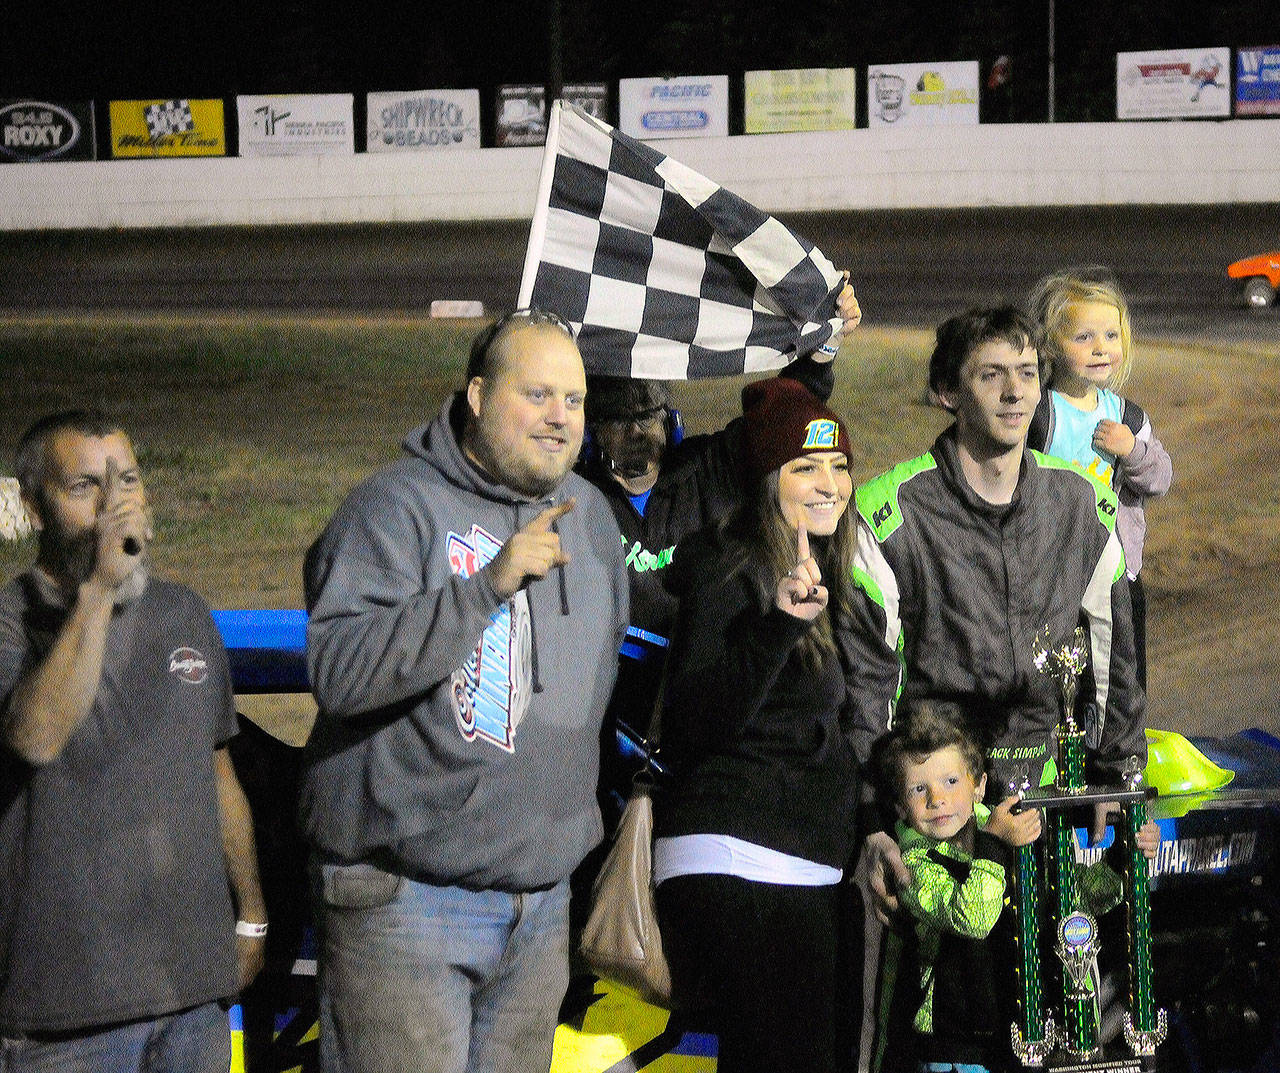 Driver Zack Simpson, second from right, regularly brings his wife and kids to the track with him on race day. From left: pit crew members Coal Canada and Tyson Henson stand next to Dallas Simpson (wife), Carter Simpson (son), Zack Simpson and Danika Simpson (daughter). (Hasani Grayson | Grays Harbor News Group)